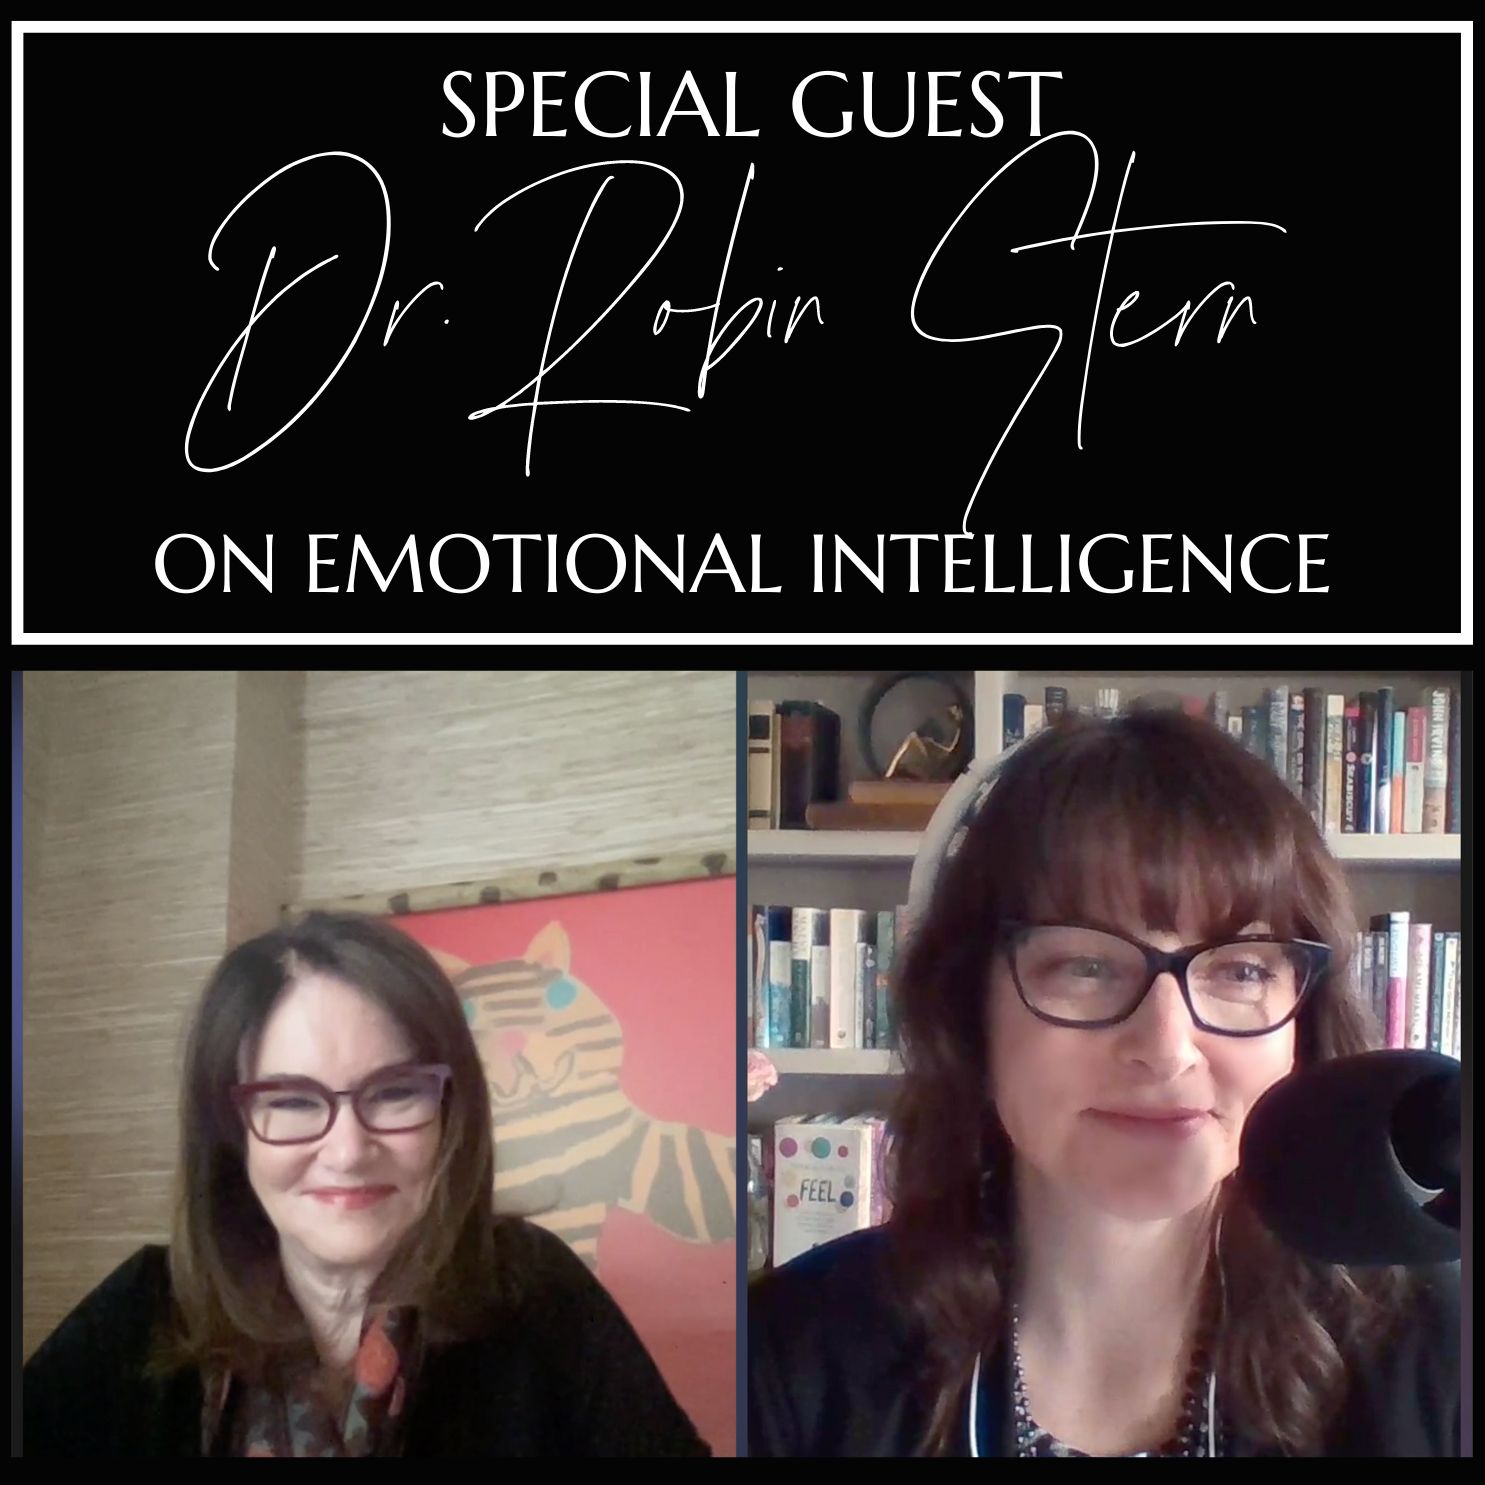 Special Guest! Dr. Robin Stern on Emotional Intelligence